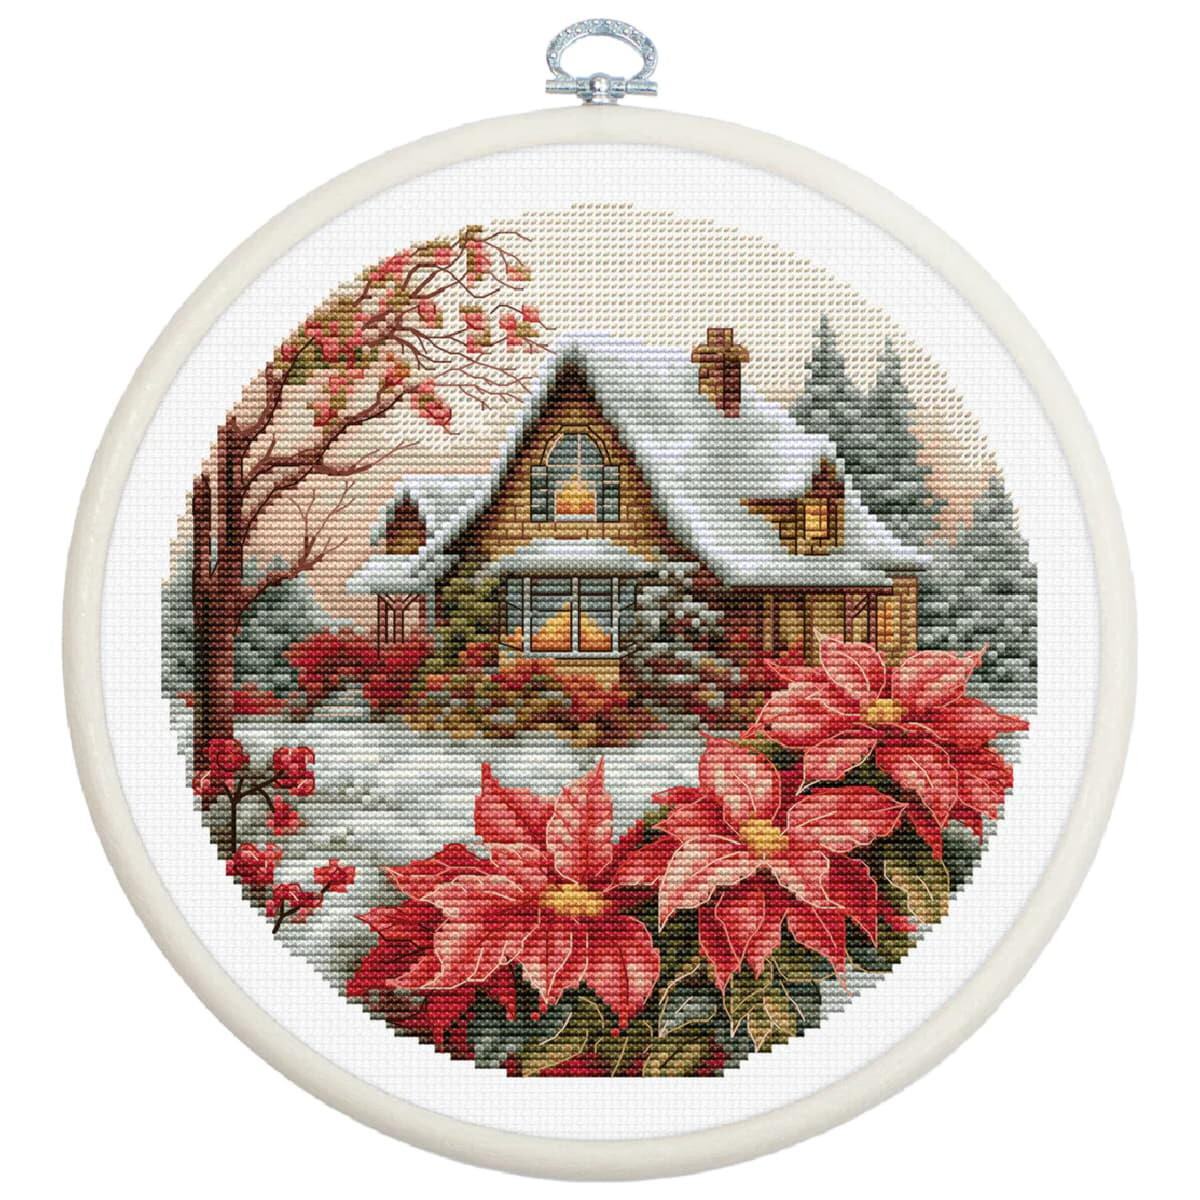 Luca-S counted cross stitch kit with hoop "Little...